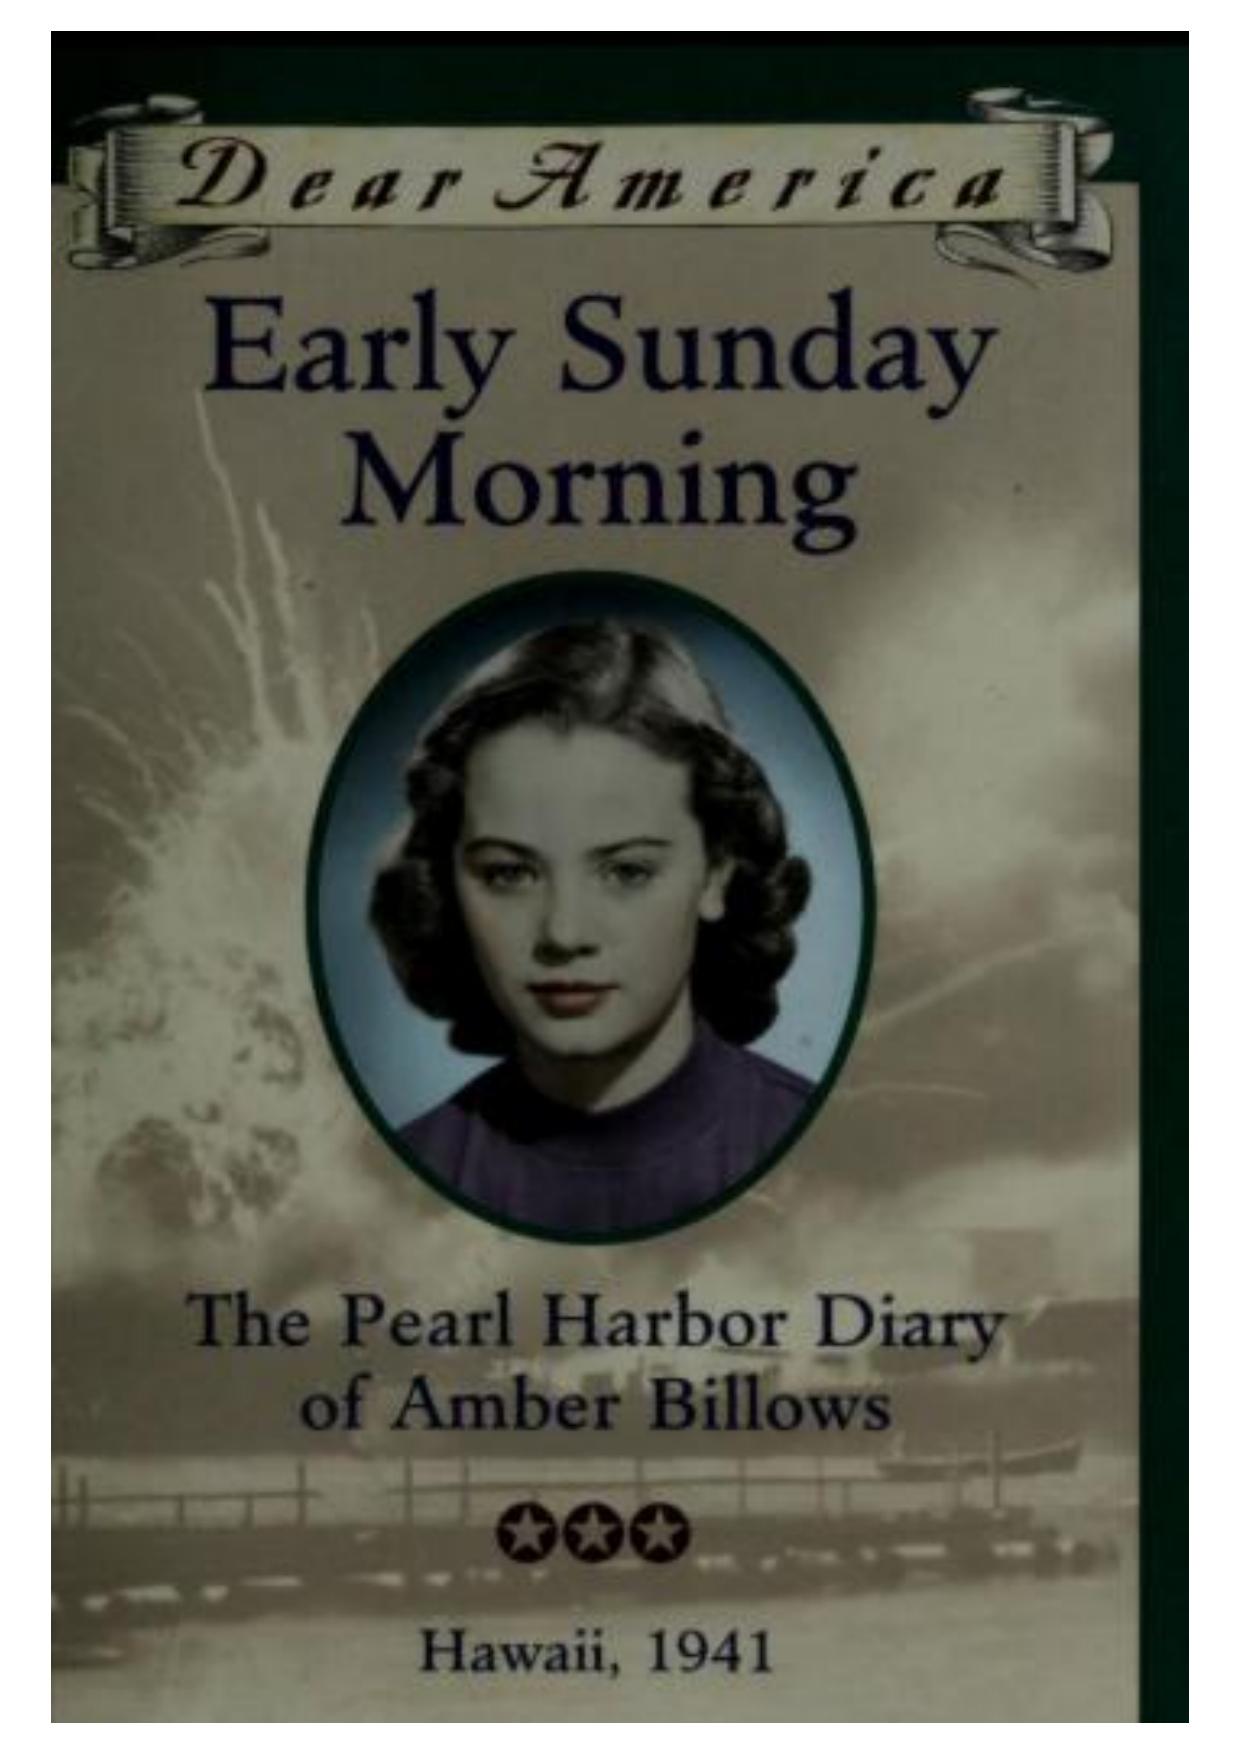 Early Sunday Morning: The Pearl Harbor Diary of Amber Billows (Dear America) by Barry Denenberg